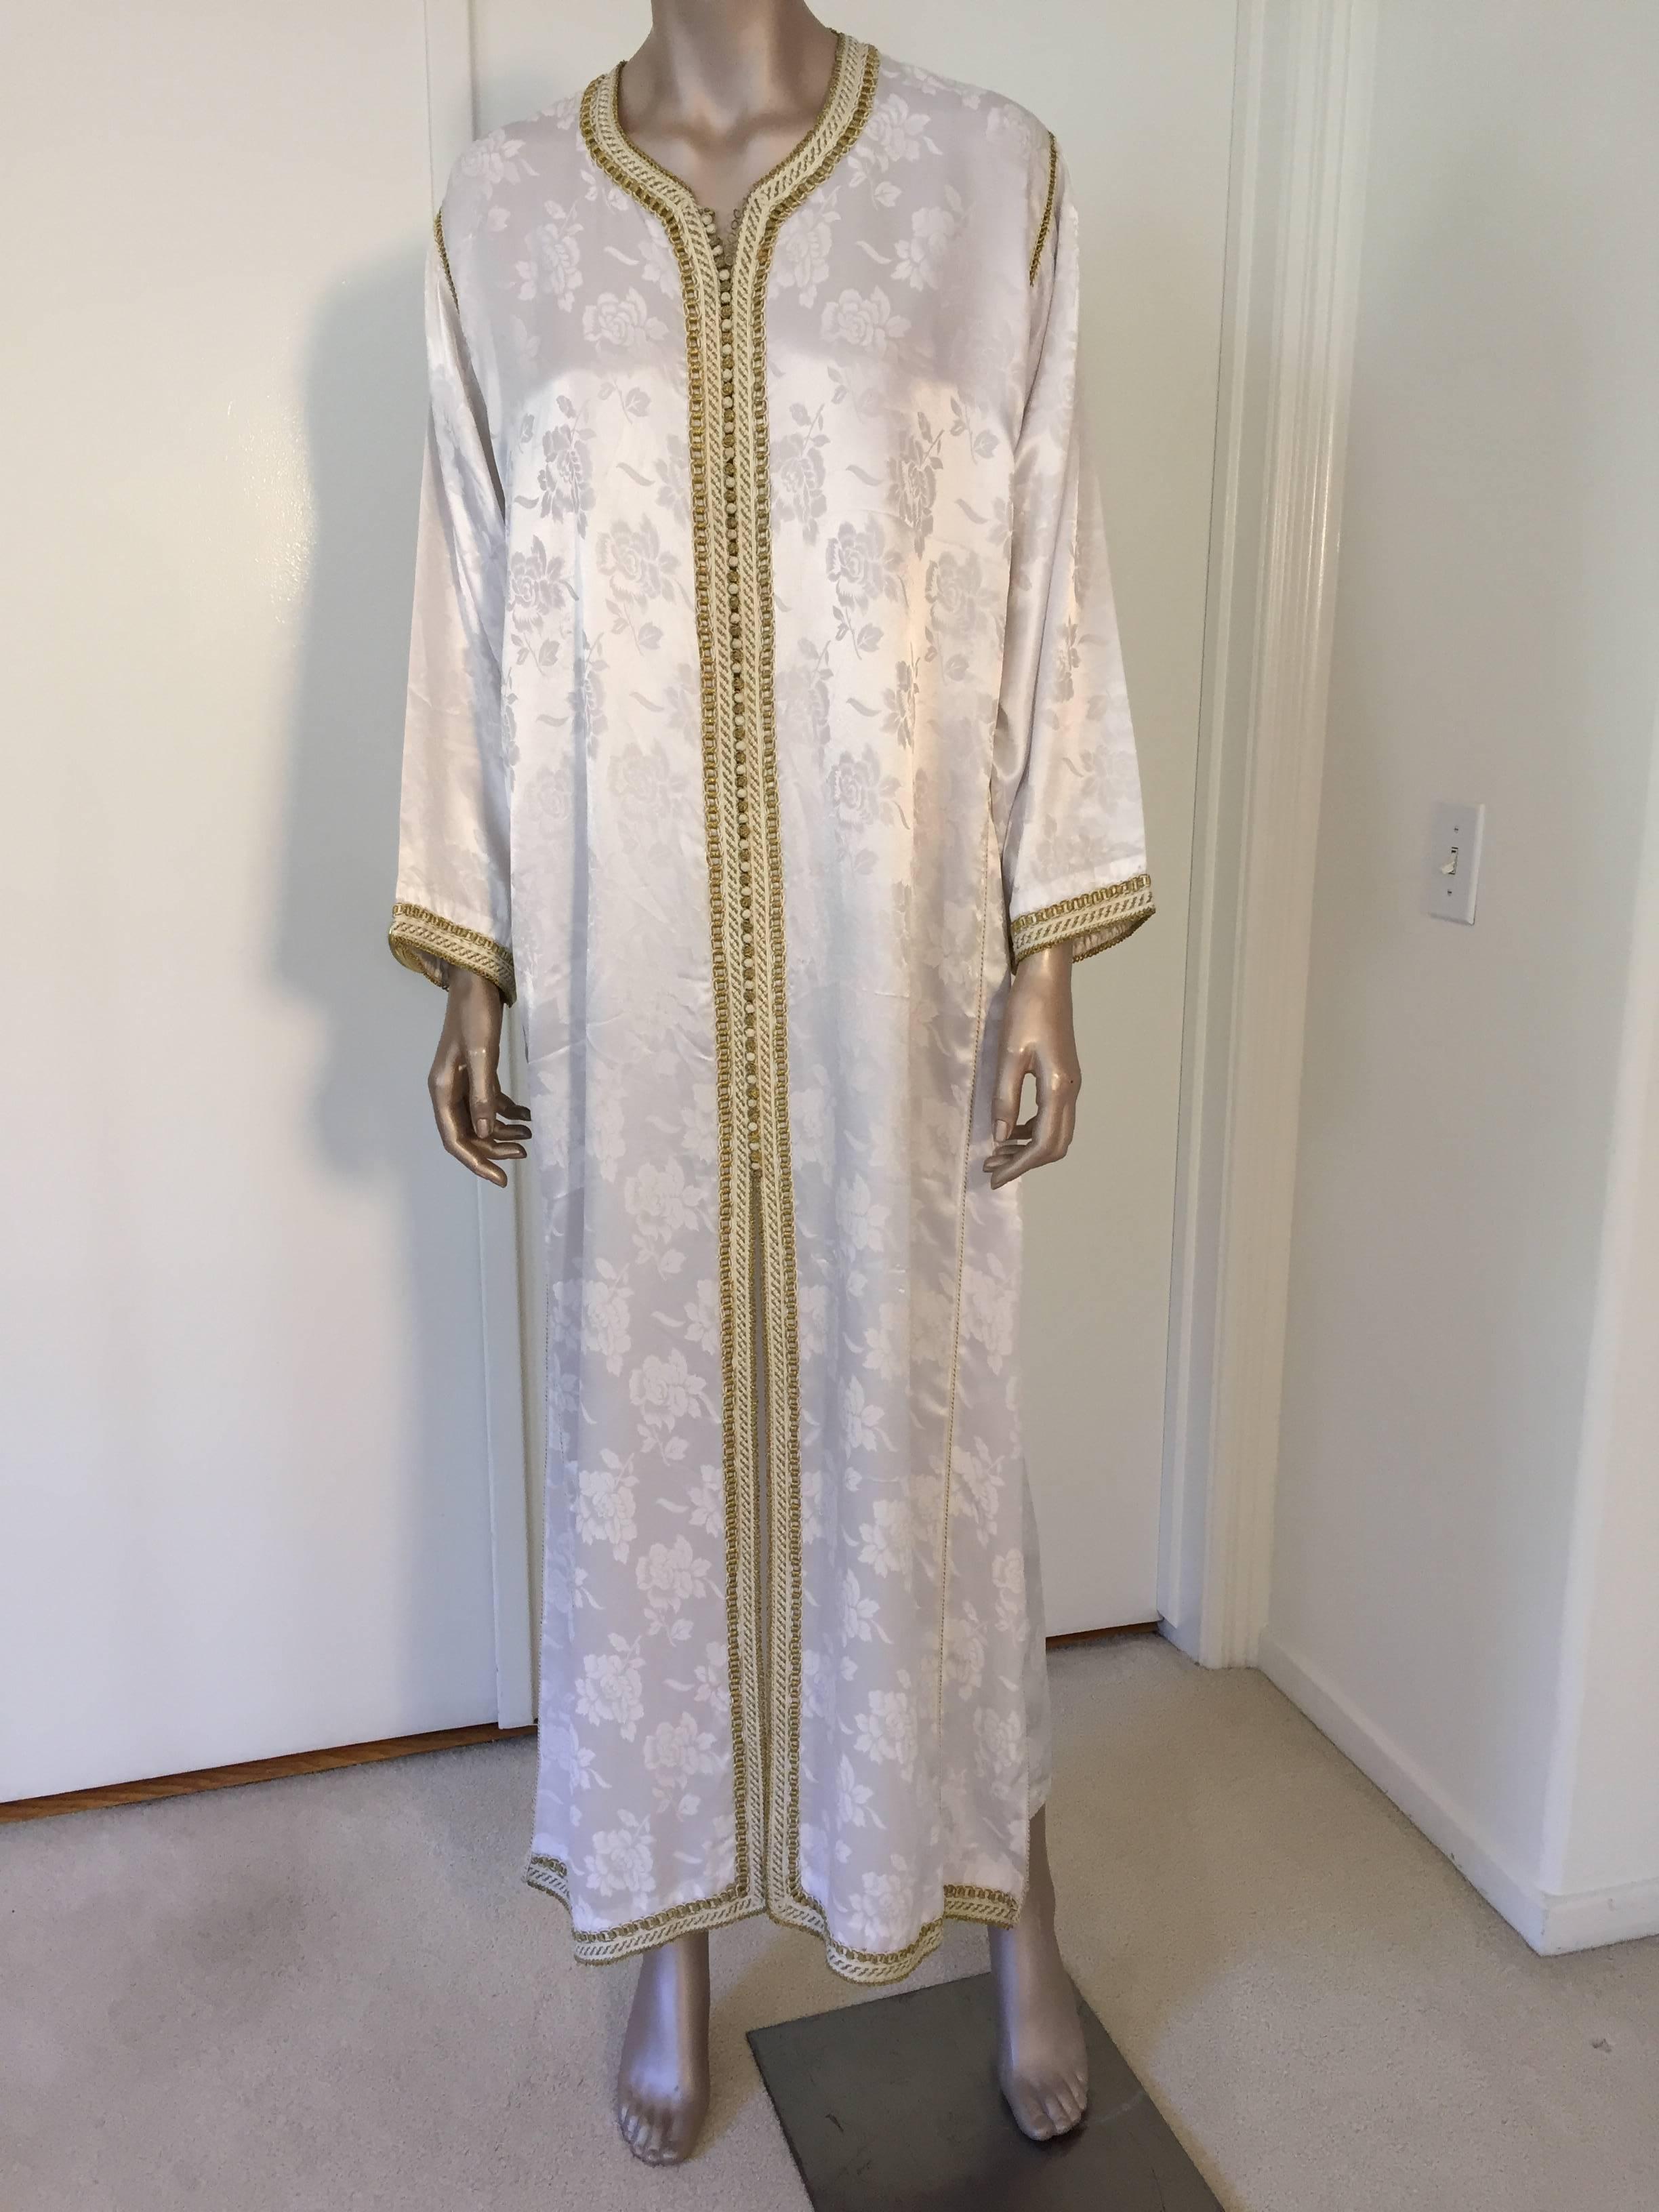 Elegant Moroccan caftan gown white embroidered with gold trim, circa 1970s. This long maxi dress kaftan is embroidered and embellished entirely by hand. One of a kind evening Moroccan Middle Eastern gown.
The kaftan features a traditional neckline,